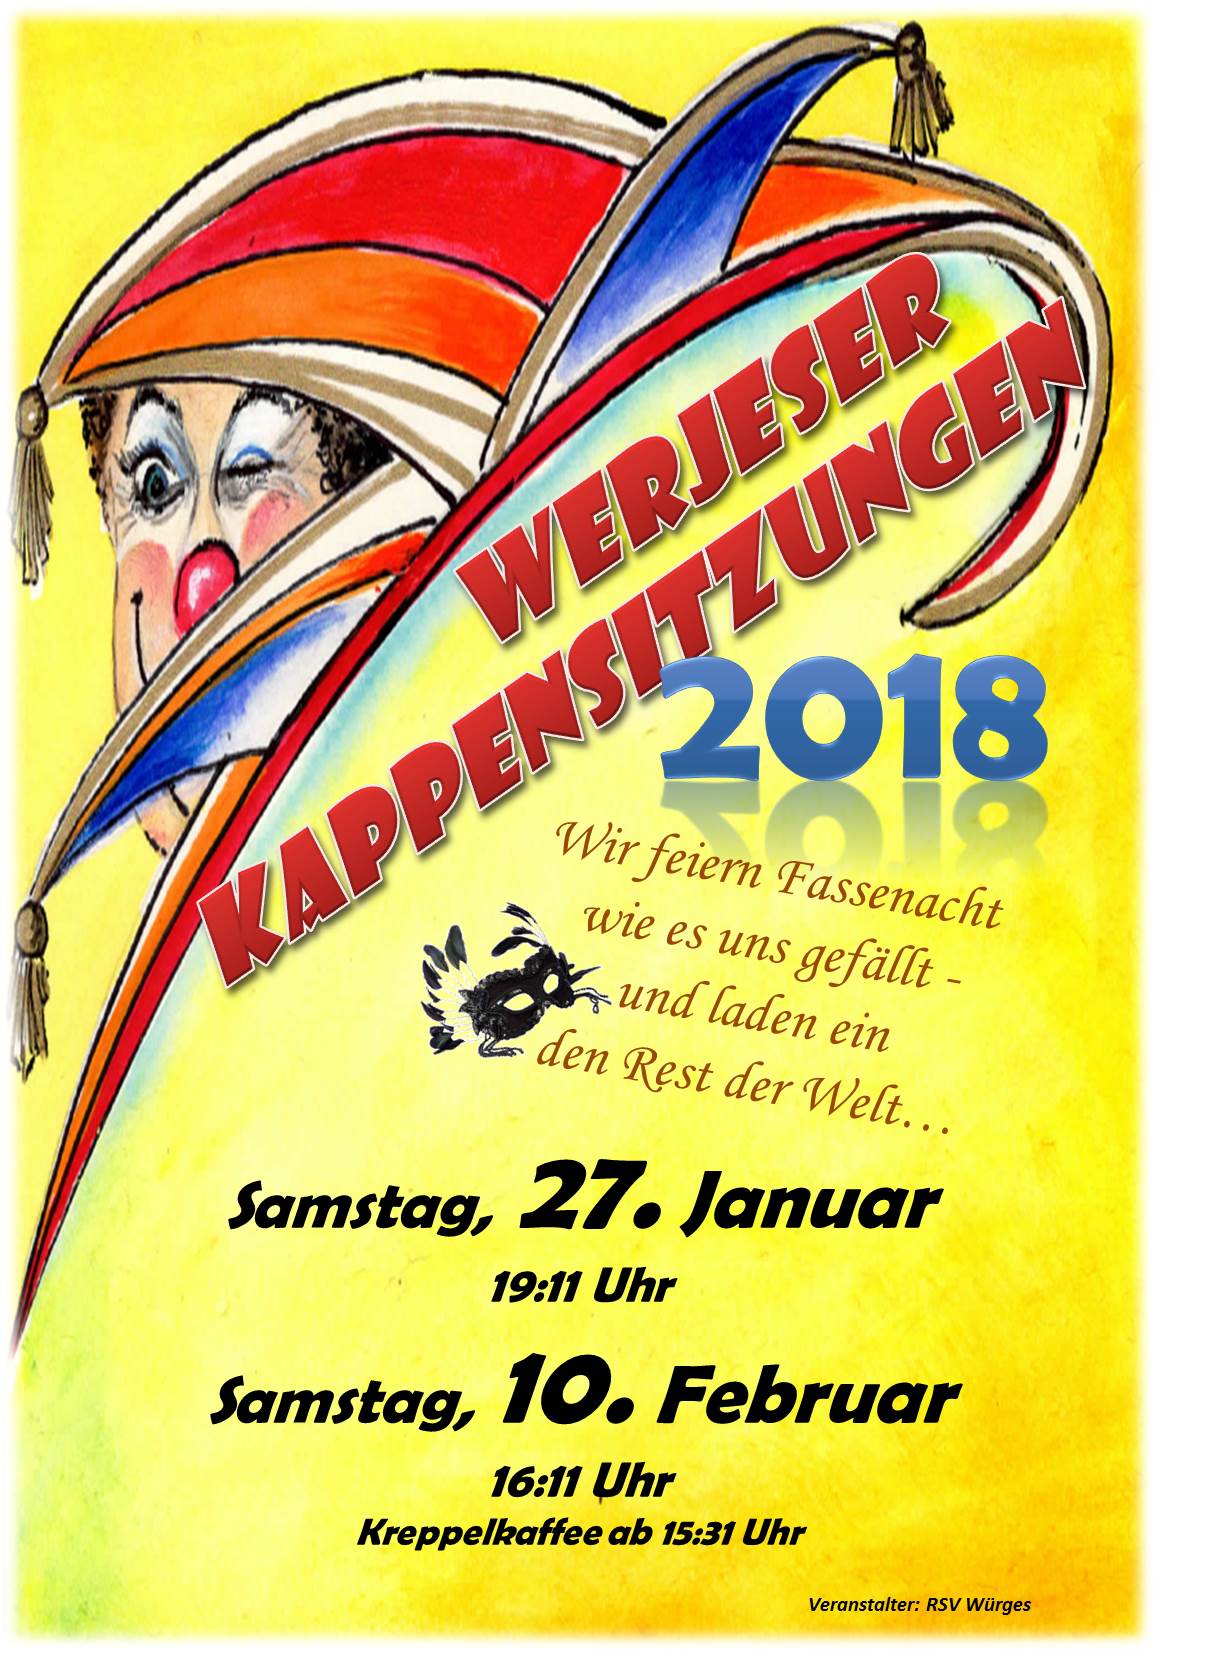 1. Kappensitzung in Bad Camberg-Würges 2018